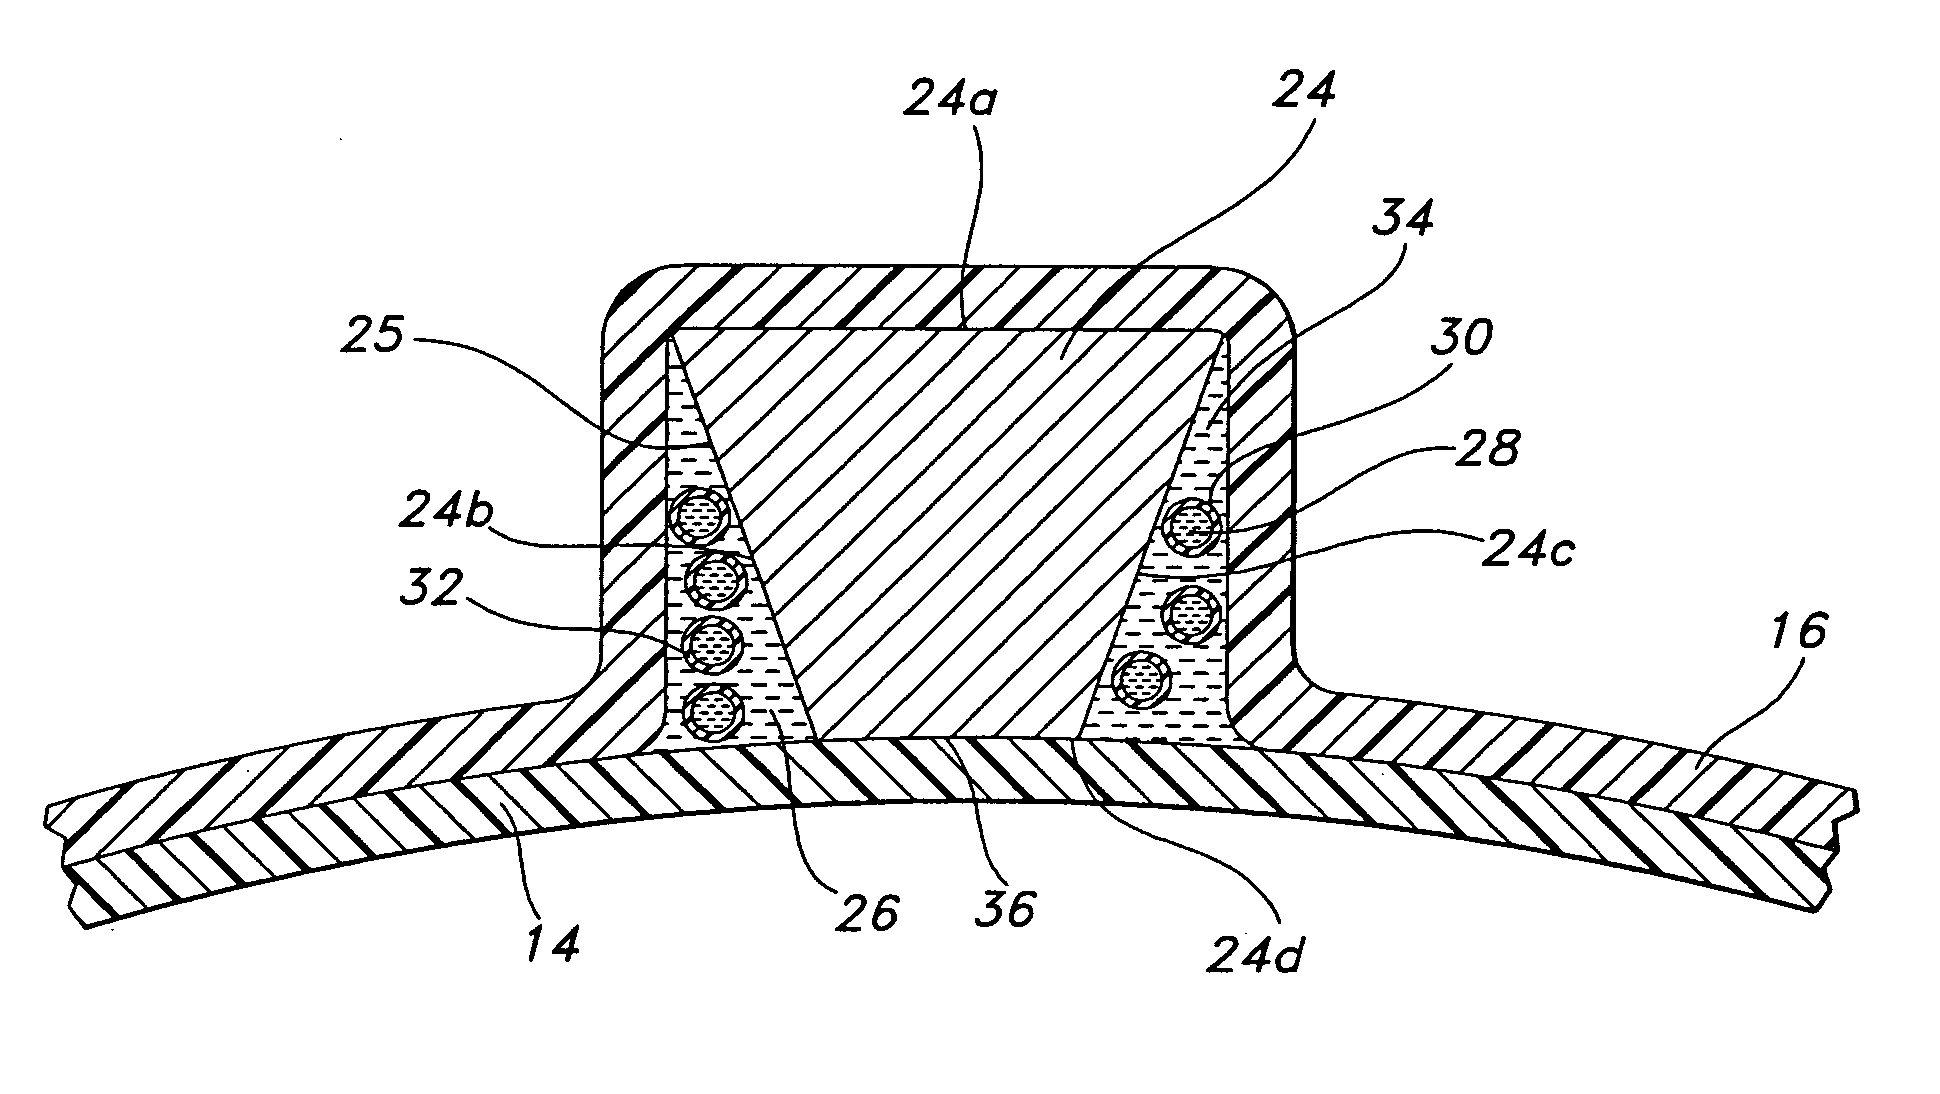 Covered stent with biologically active material